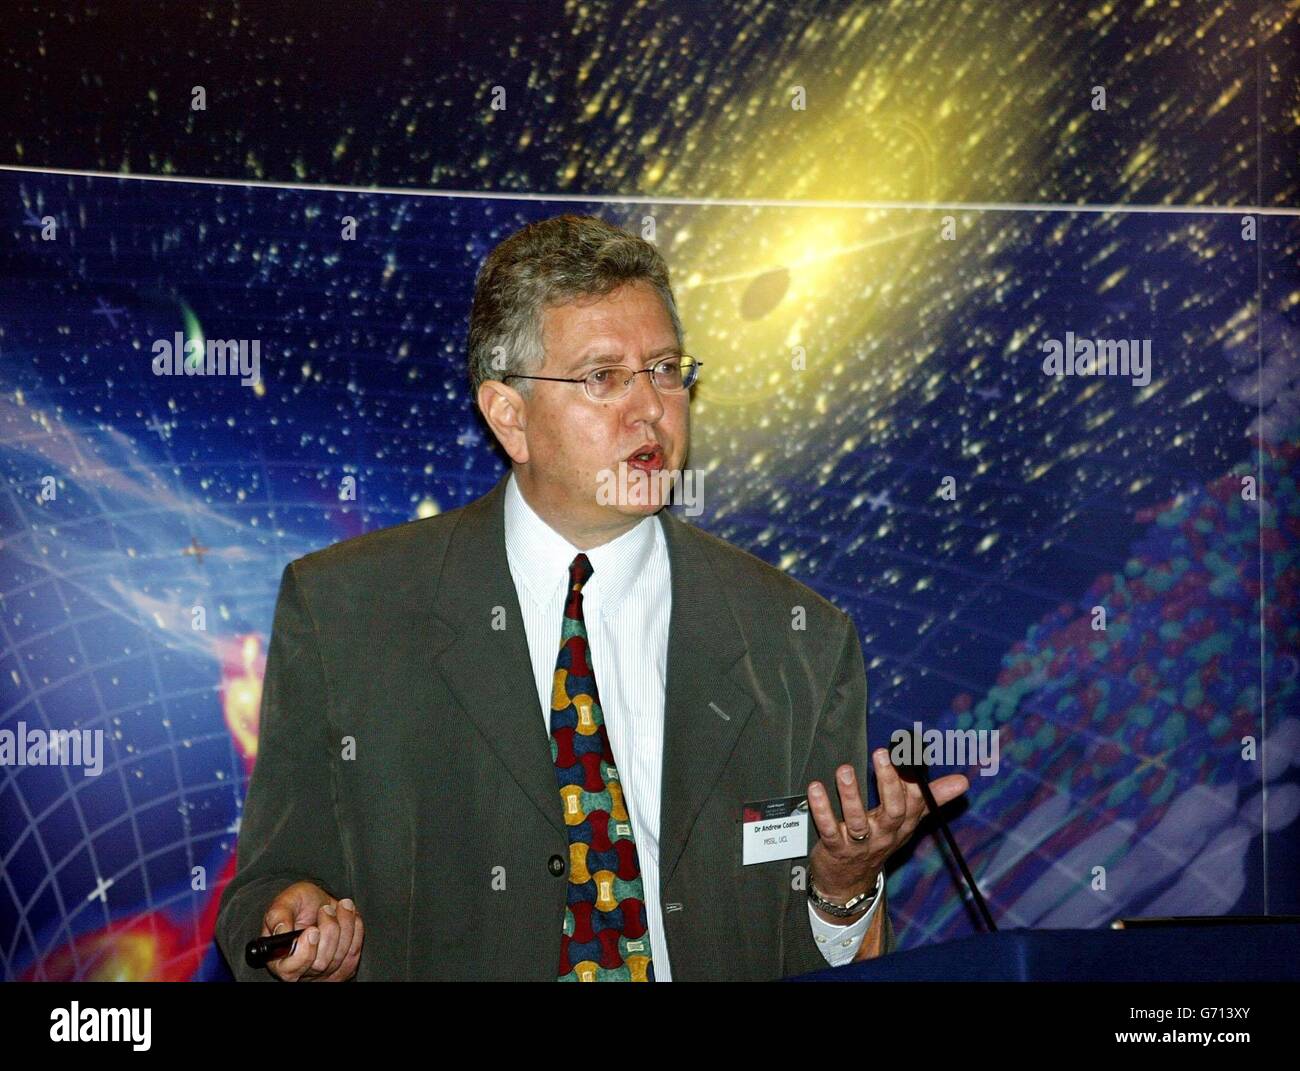 UK scientist Dr. Andrew Coates delivers his speech at the Cassini-Huygens spacecraft press conference at the Connaught Rooms, London. Cassini-Huygens a joint NASA European Space Agency mission will enter Saturn's orbit on July 1, 2004 after a seven year journey. UK scientists are involved with instruments on both the Cassini orbiter and the Huygens probe. Huygens will separate and descend onto Titan, Saturn's largest moon on January 14, 2005. Stock Photo